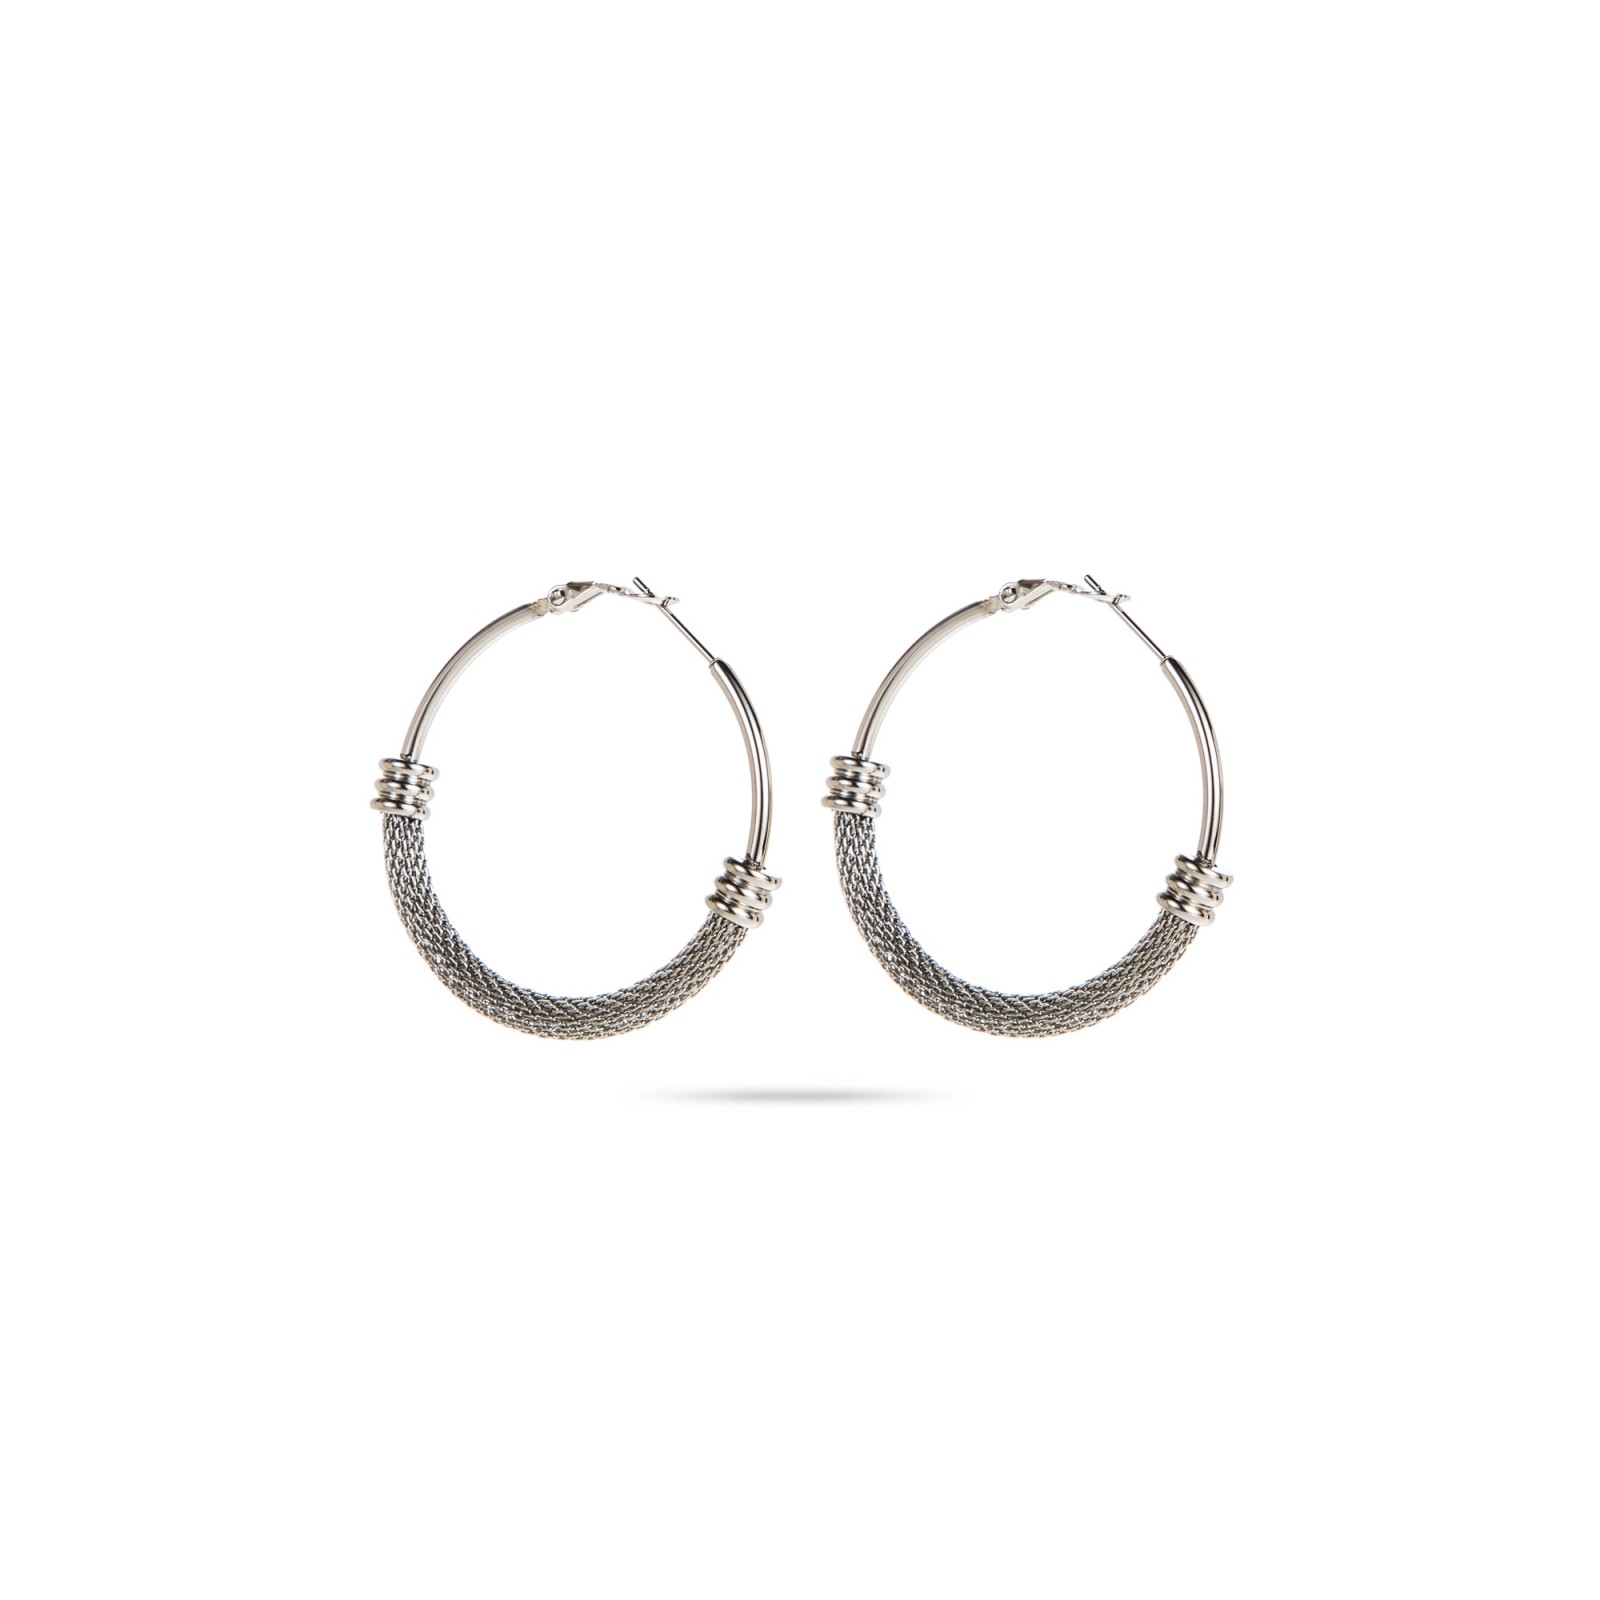 Hoops Earrings with Rice Grain Chain Color:Silver